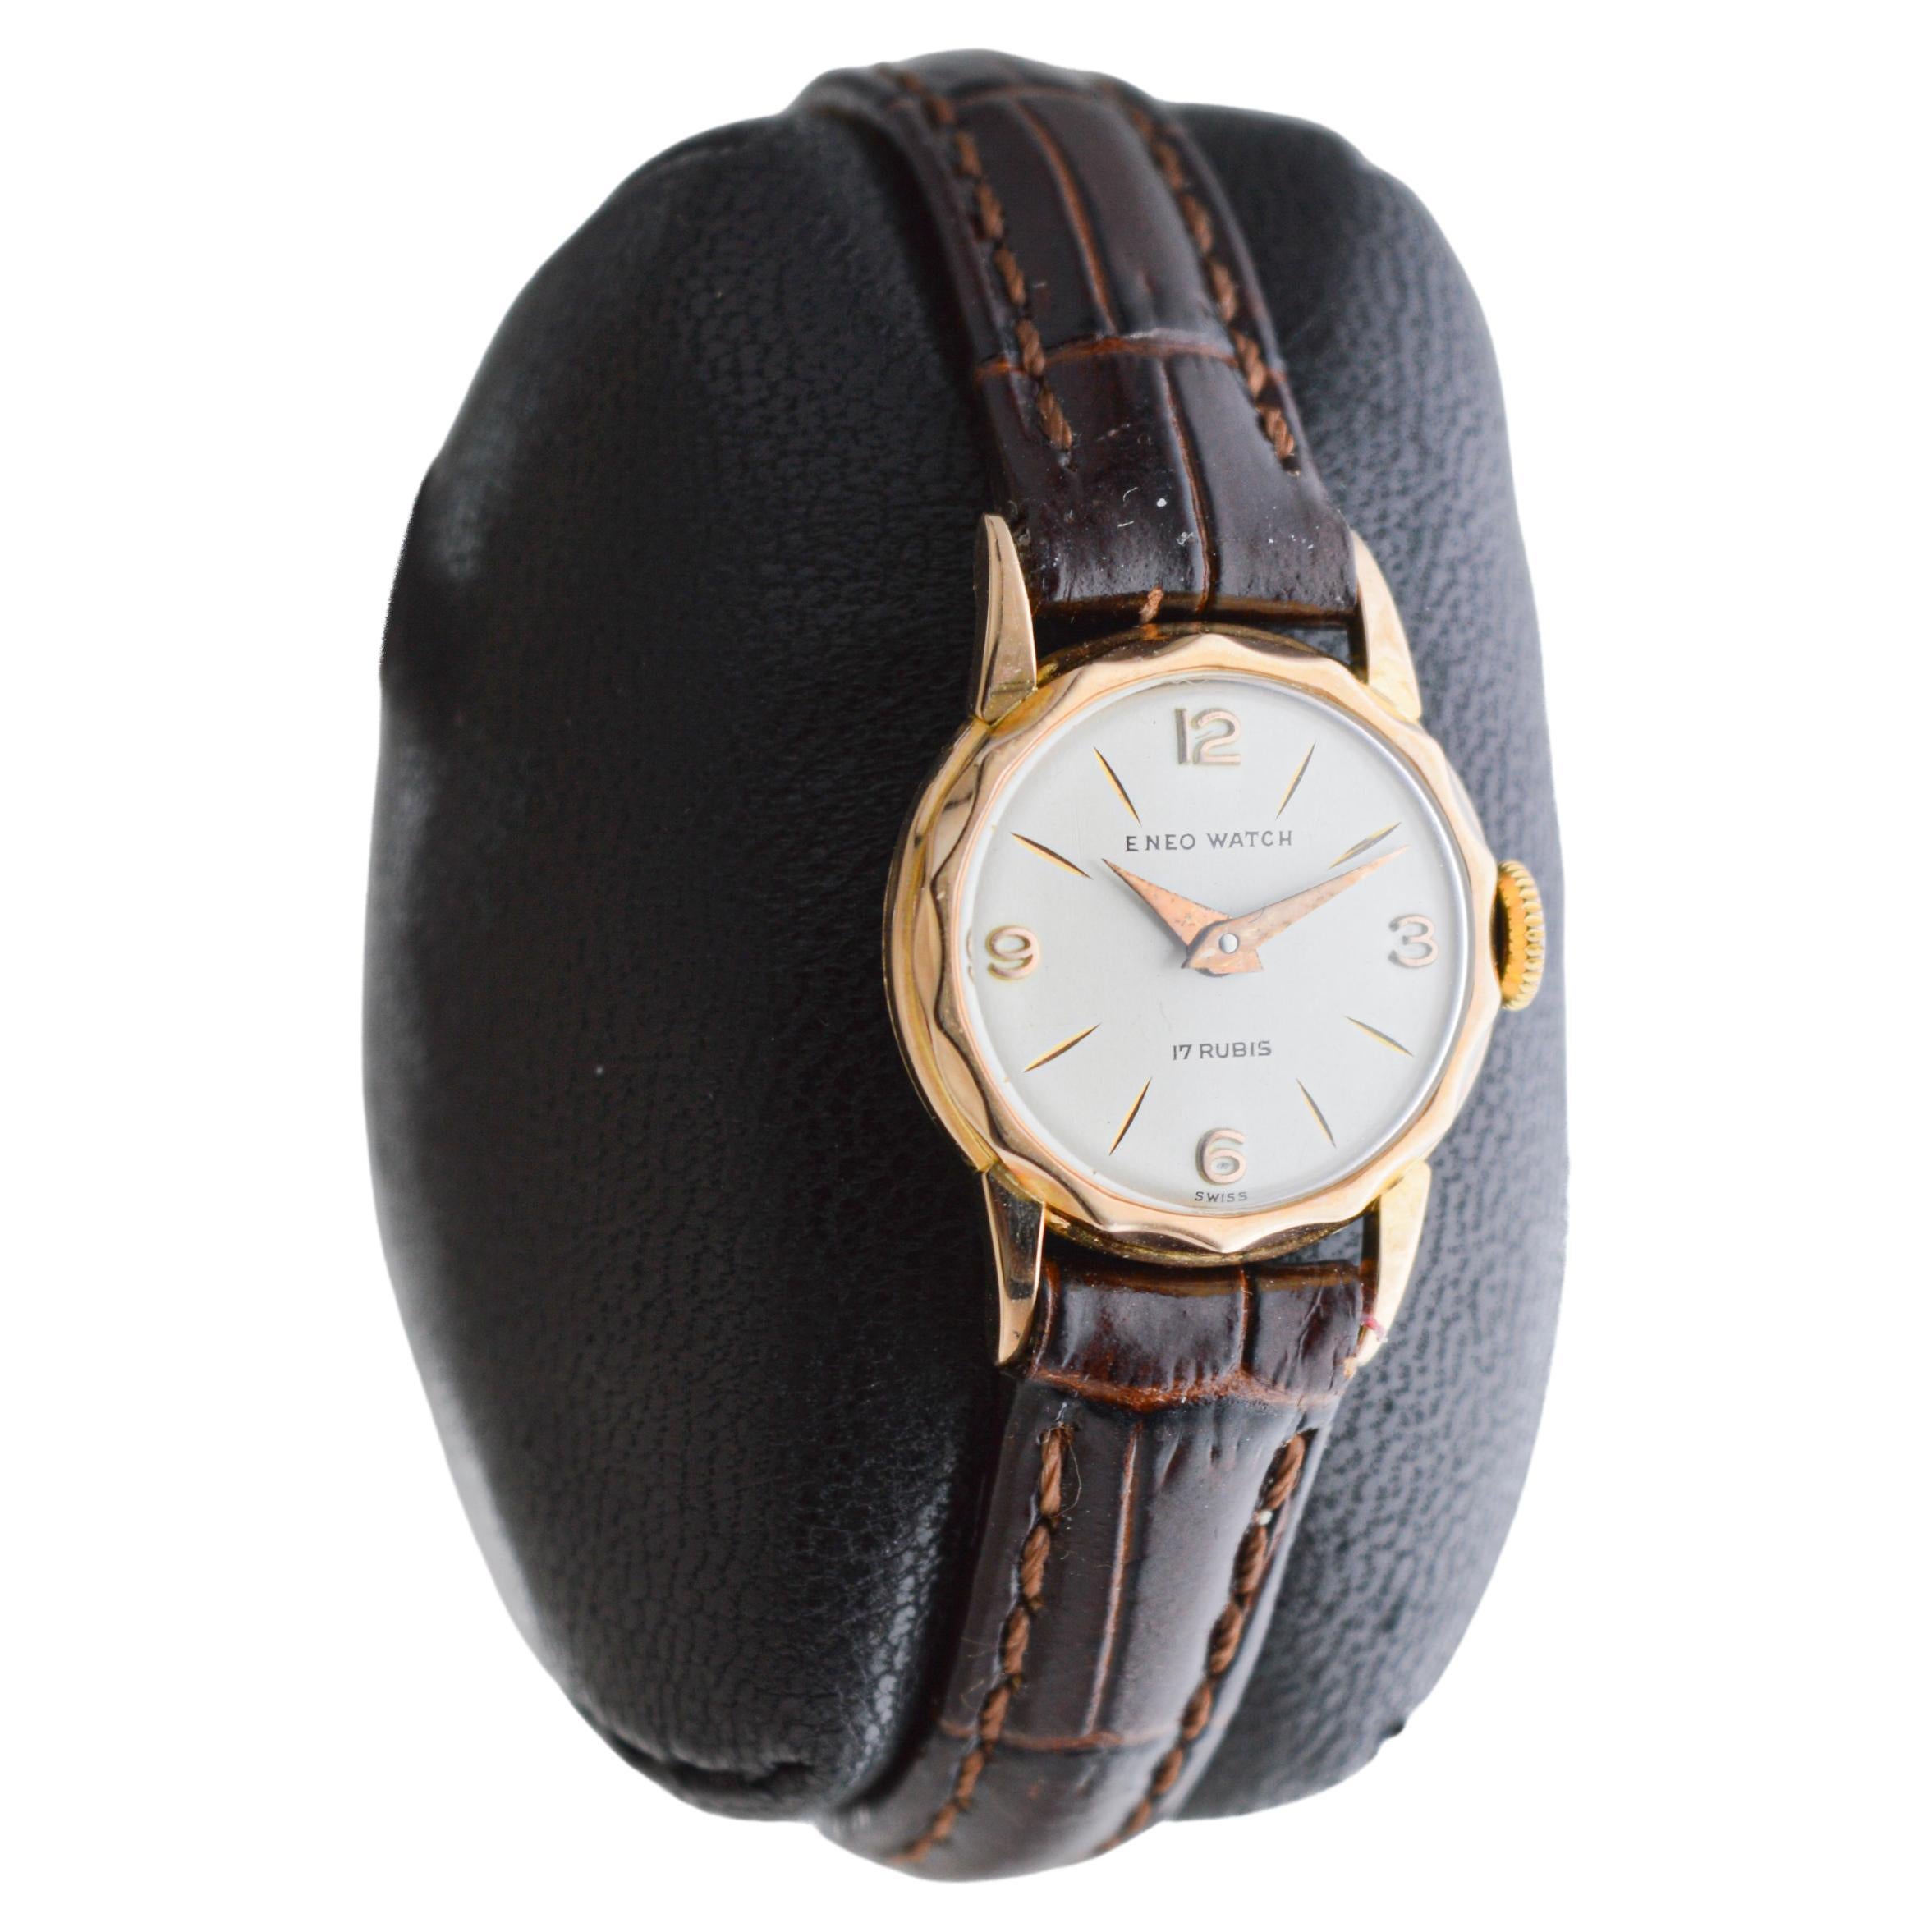 FACTORY / HOUSE: Eneo Watch Company
STYLE / REFERENCE: Art Deco
METAL / MATERIAL: 18Kt Rose Gold
CIRCA / YEAR: 1950's
DIMENSIONS / SIZE: Length 25mm X Diameter 19mm
MOVEMENT / CALIBER: Manual Winding / 17 Jewels / Caliber ETA 1010 
DIAL / HANDS: